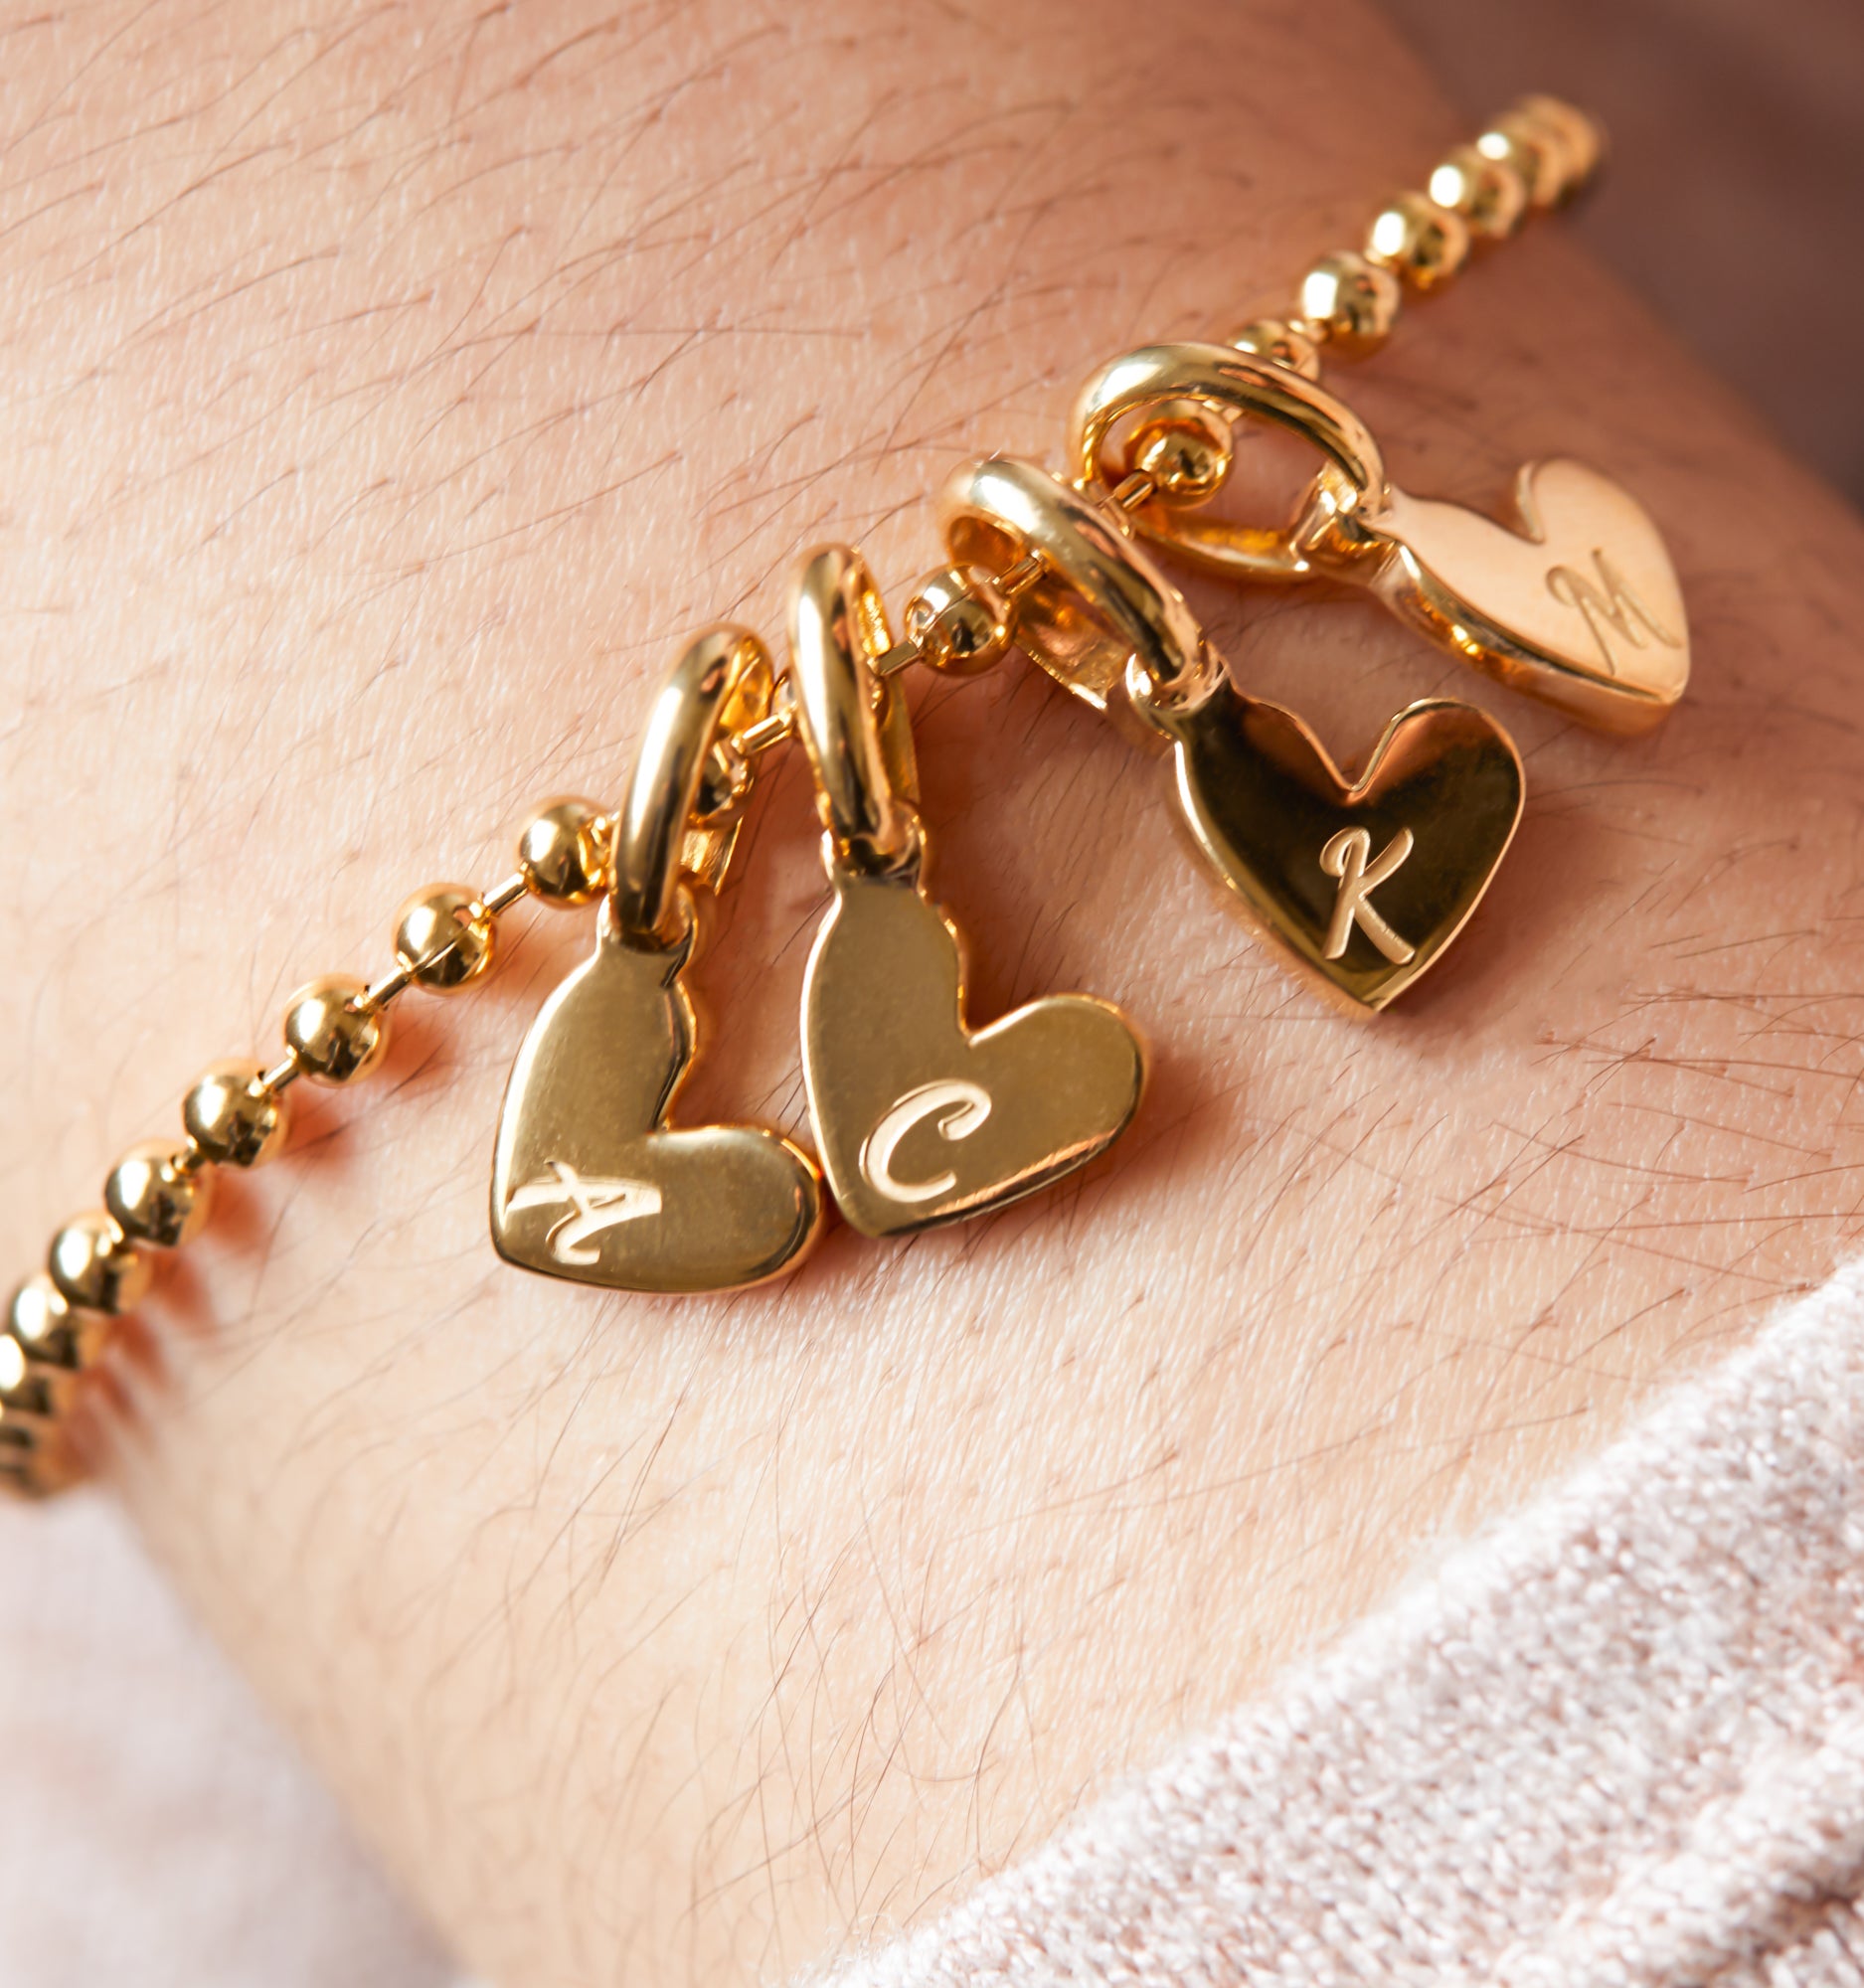 Gold Collection - Champagne Agate Gemstone Bracelet with Heart Mom Charm |  T. Jazelle